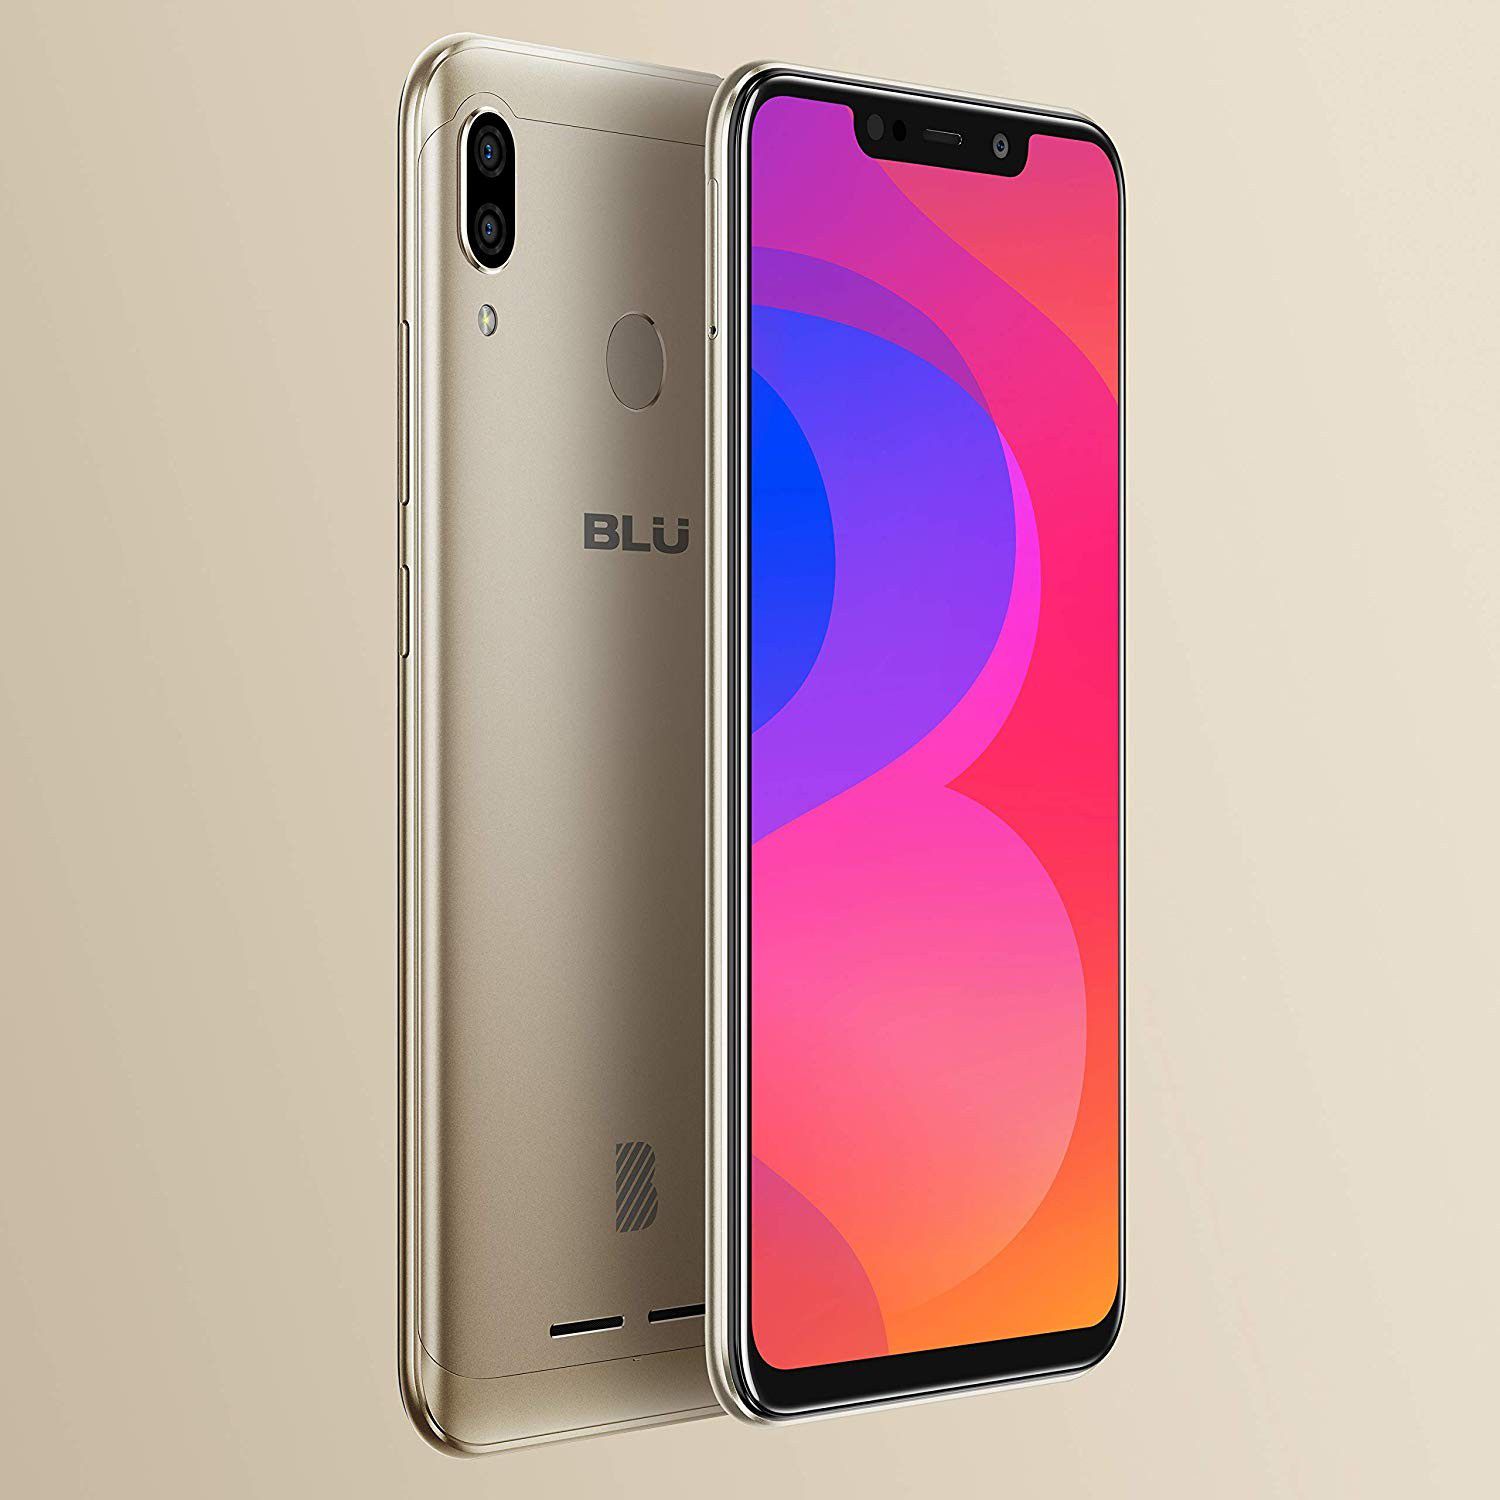 NEW BLU FACTORY UNLOCKED PHONE.BEST ANDROID UNDER $200 OUT THERE!! 6.2 SCREEN, 32GB, 13MP CAMERAS 3GB RAM, AMAZING!!!